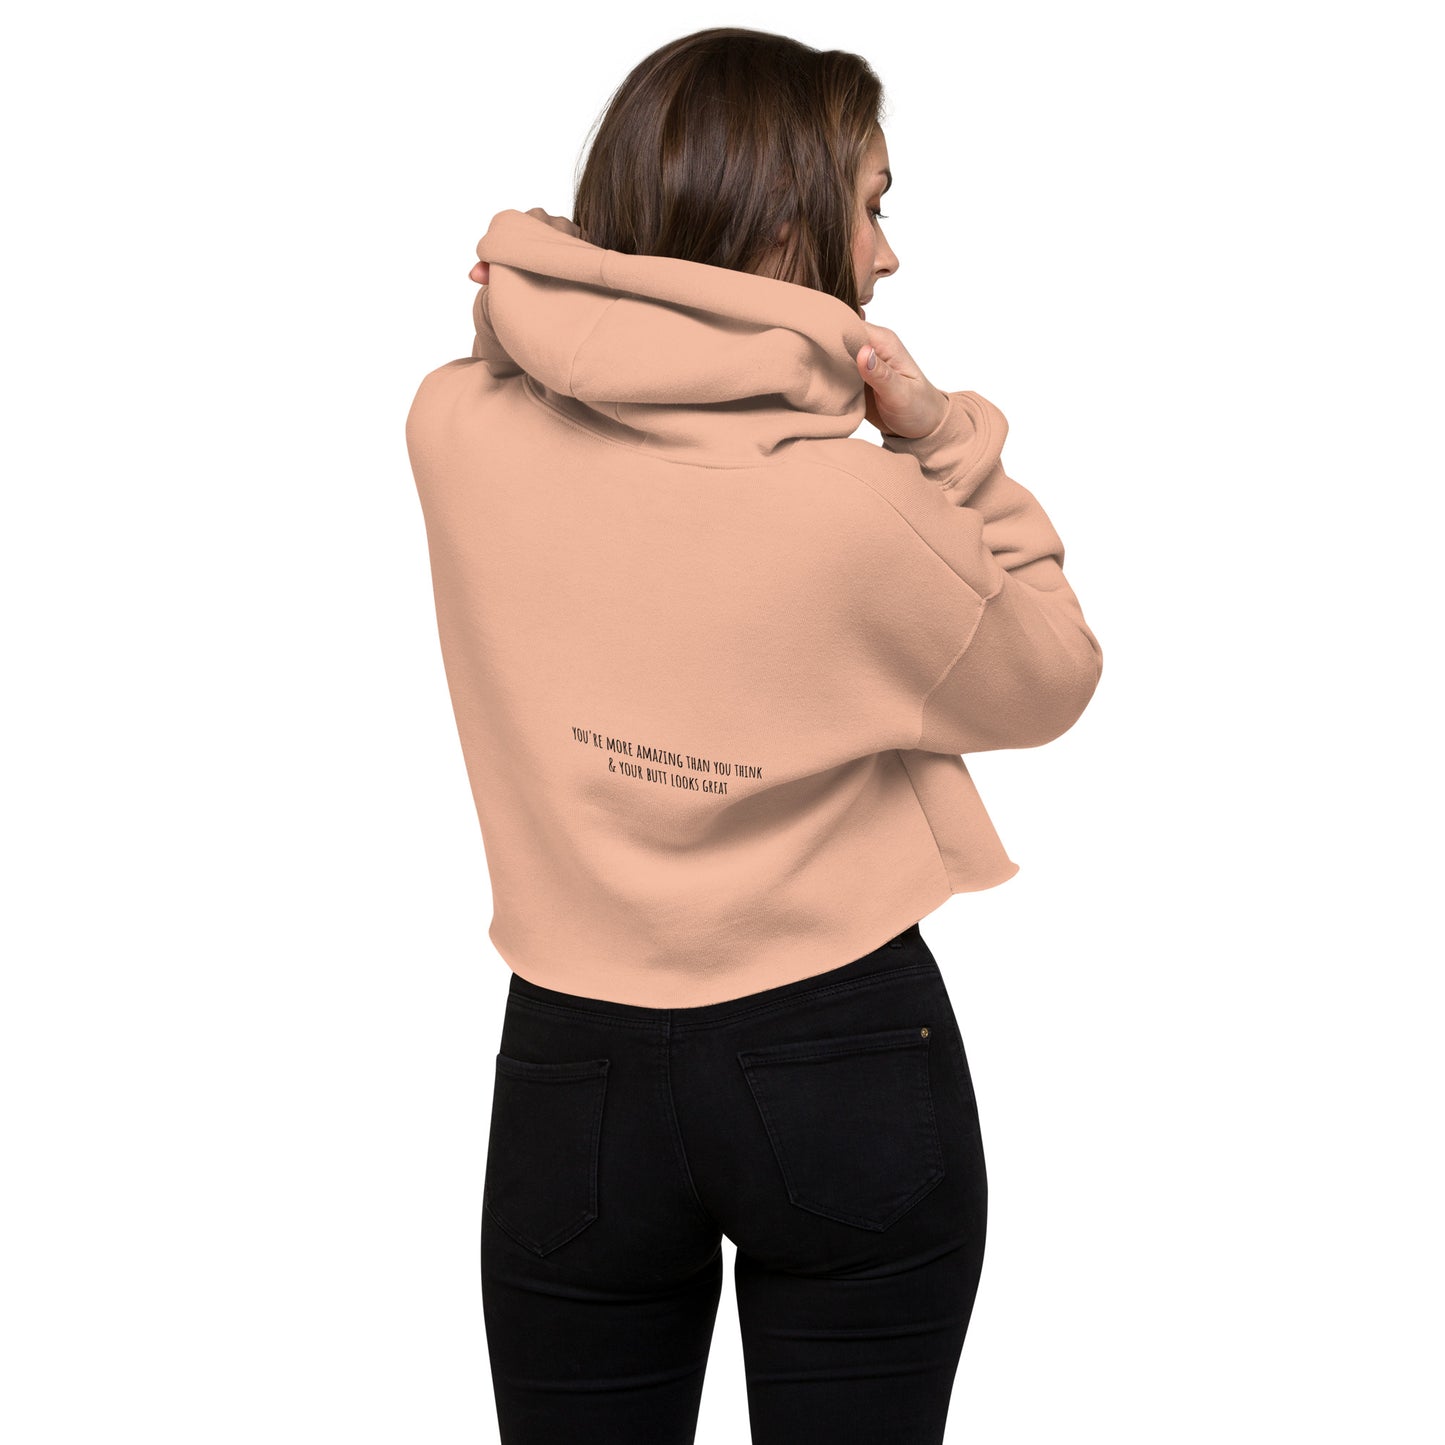 Crop Hoodie with a Flirty Message